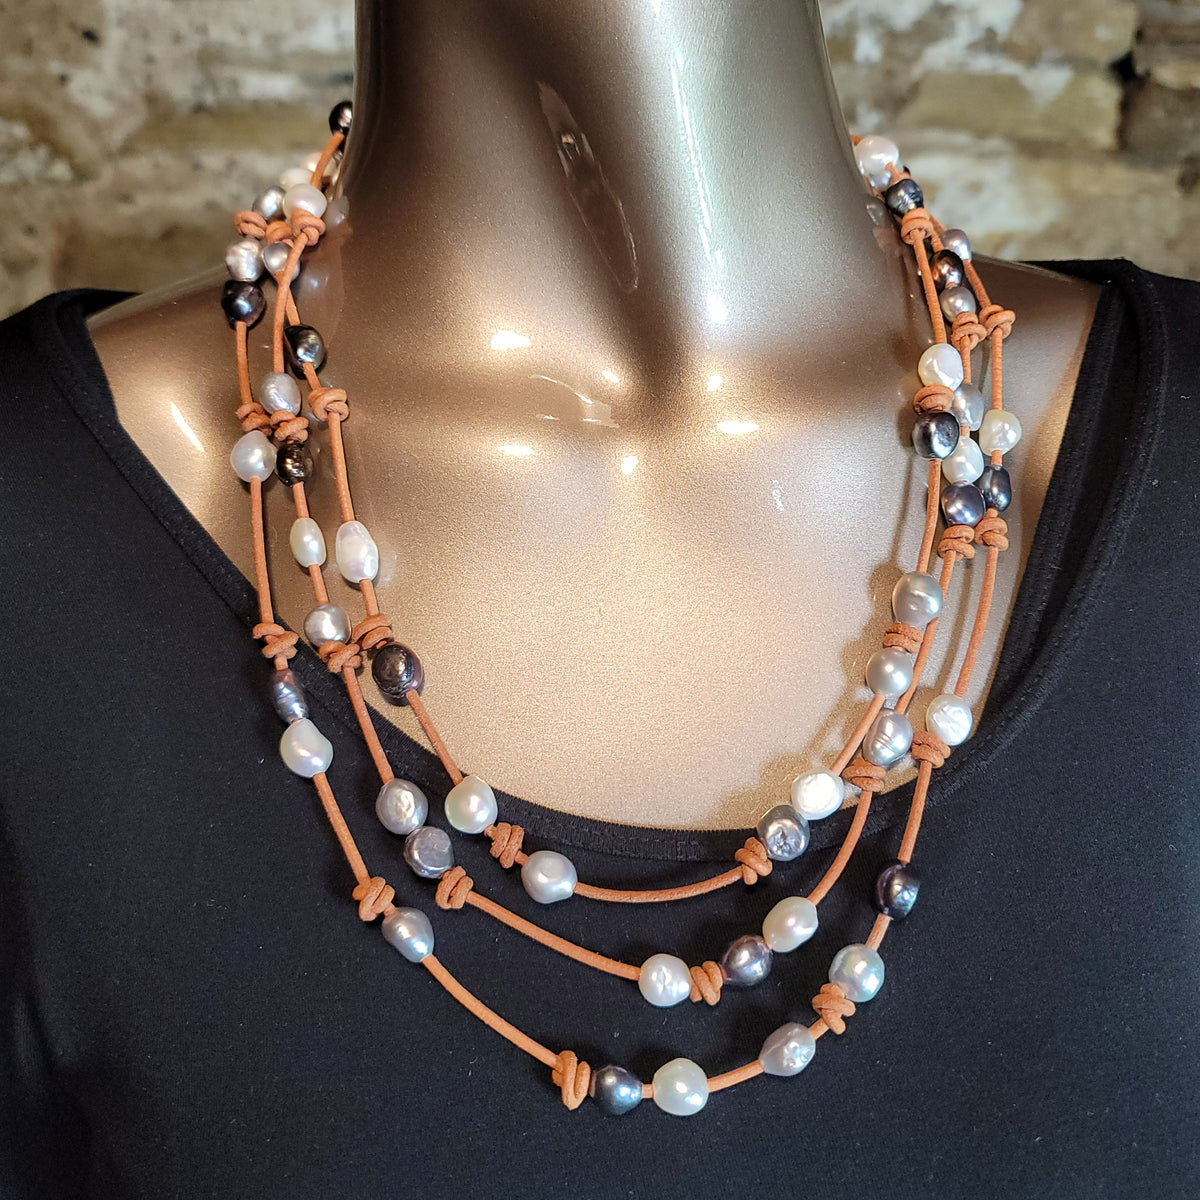 80" Multi Pearl/Leather Knotted Wrap Necklace - NPM1